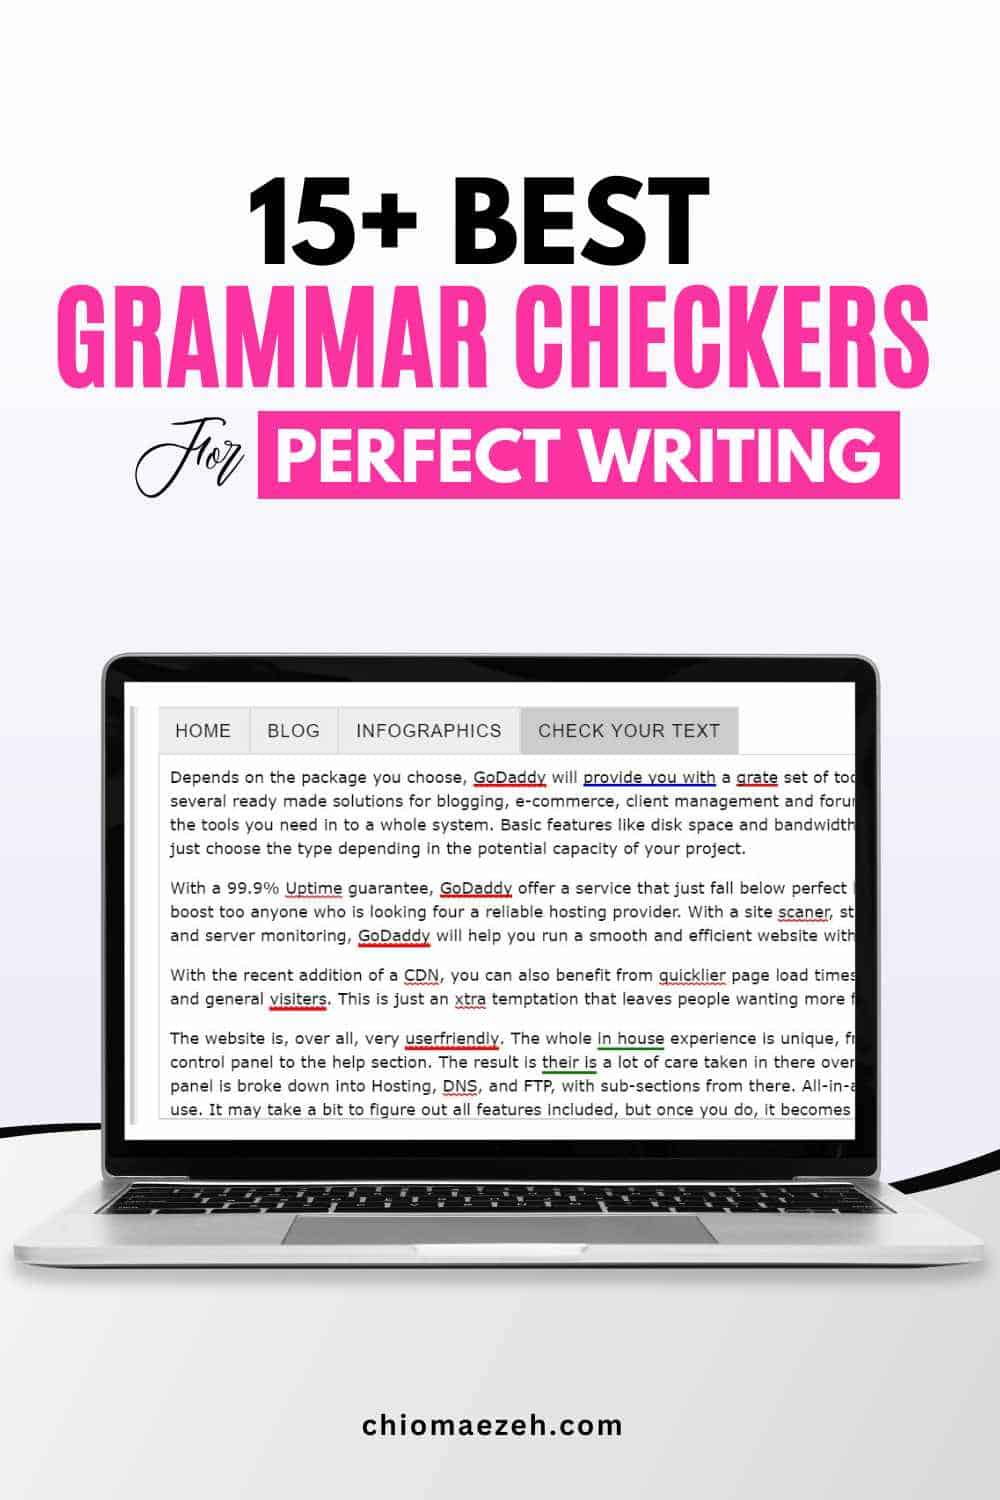 grammar checkers for perfect writing